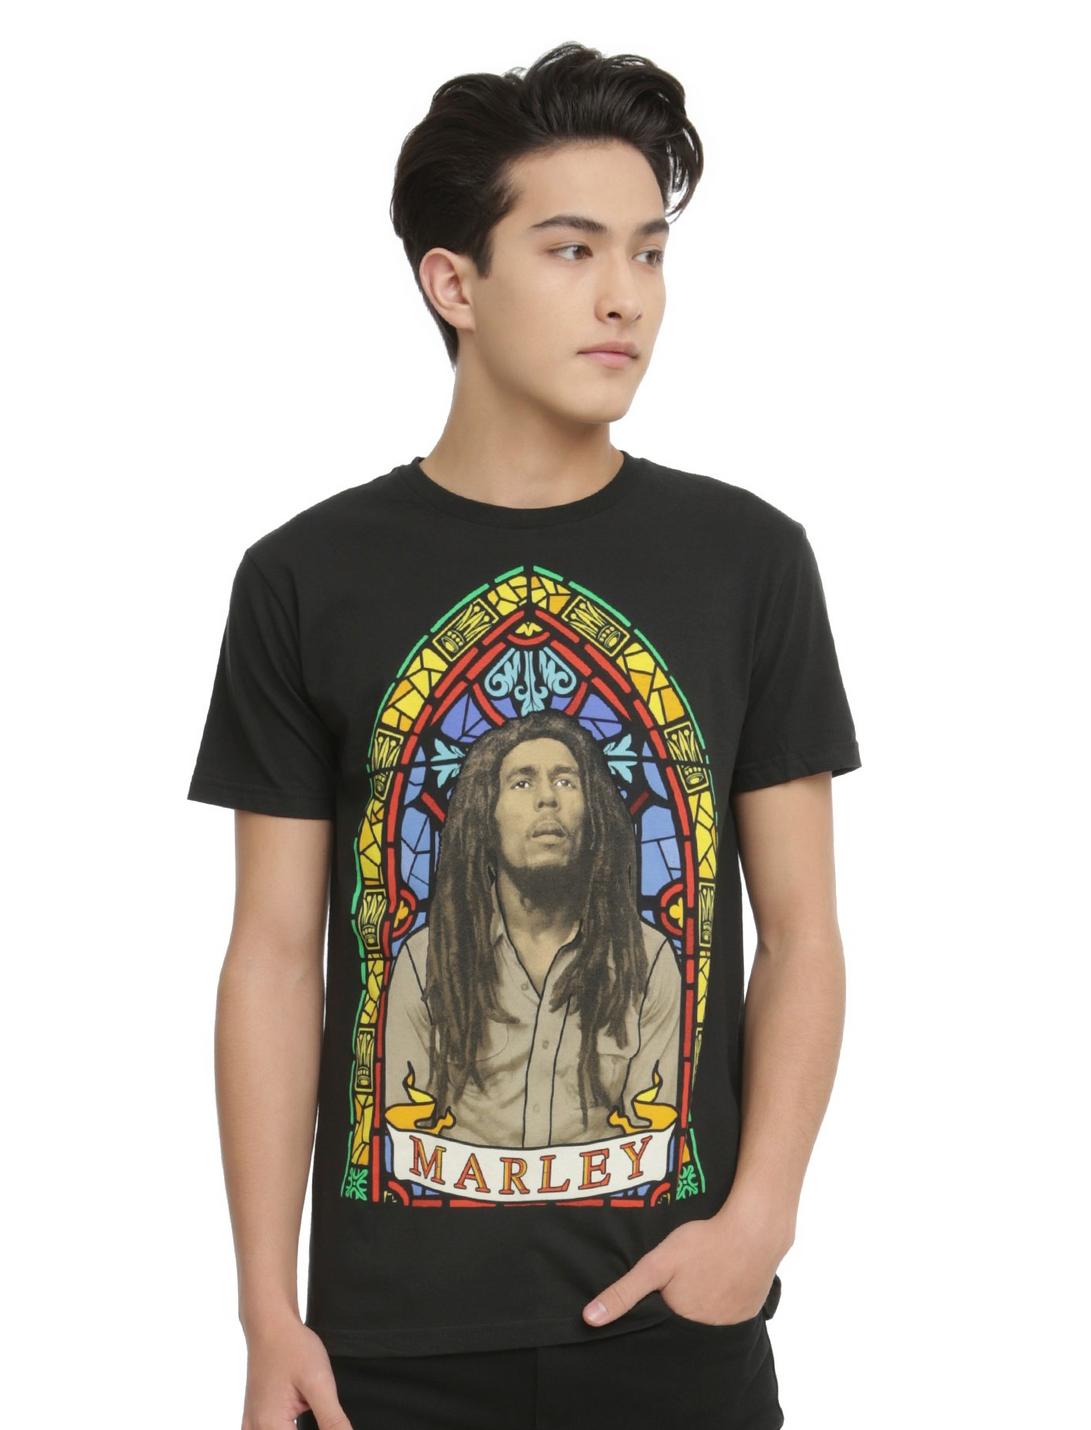 Bob Marley Stained Glass T-Shirt, BLACK, hi-res